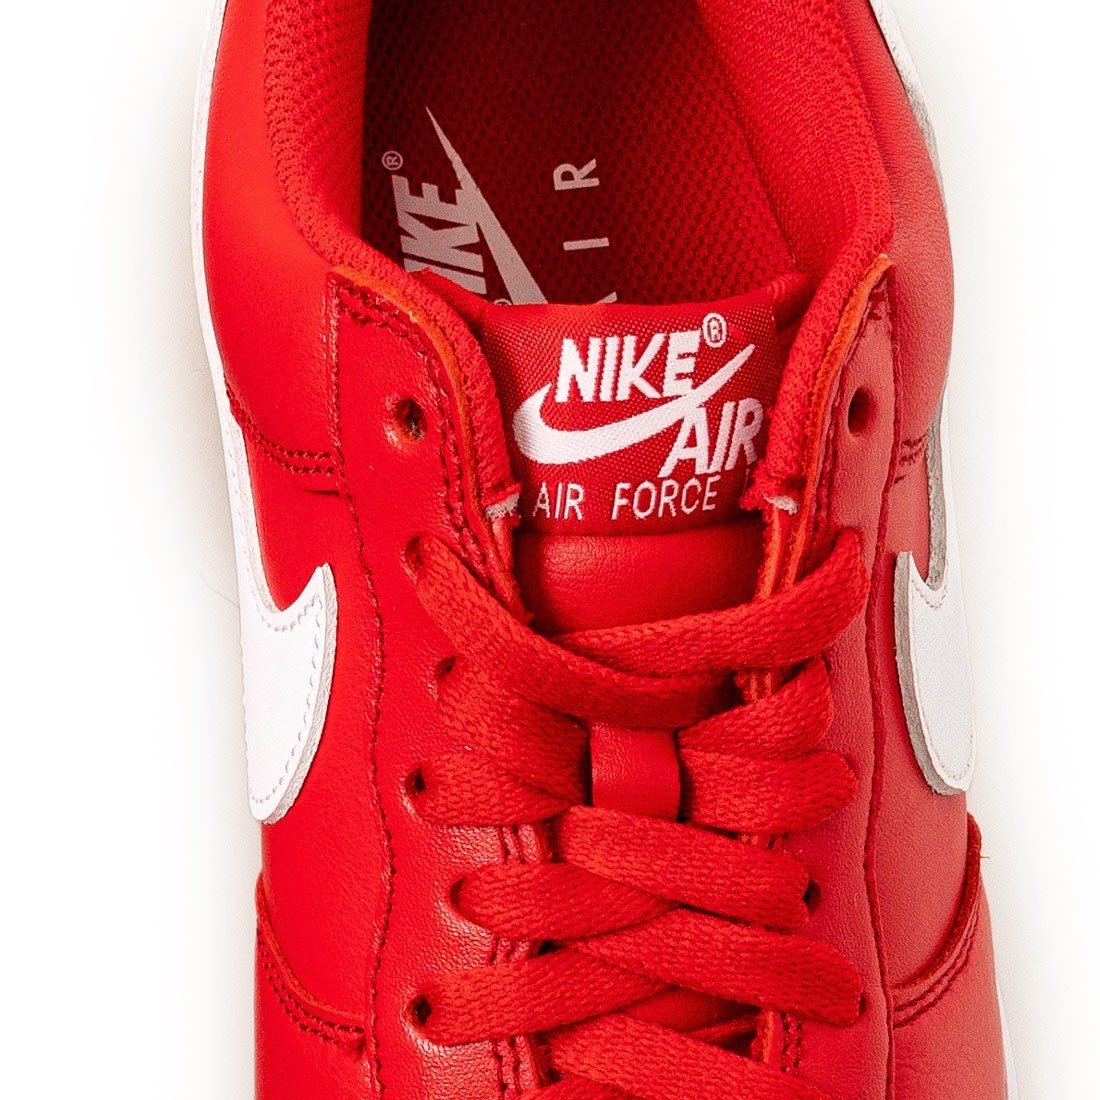 Nike Air Force 1 Low Retro University Red/White / 4 / FD7039-600